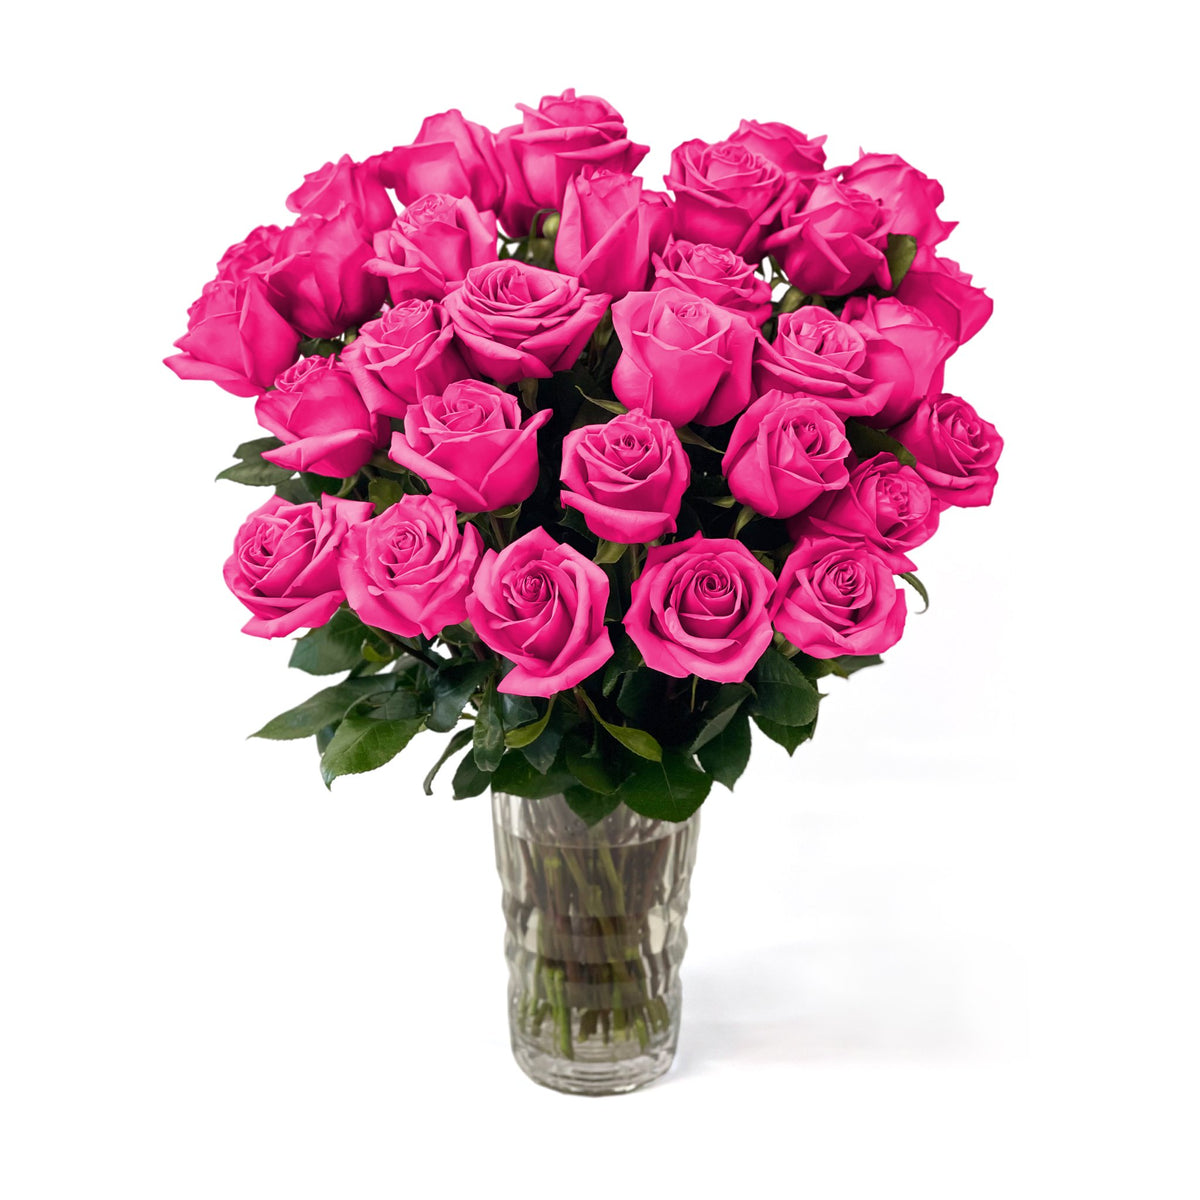 Queens Flower Delivery - Fresh Roses in a Crystal Vase | Hot Pink